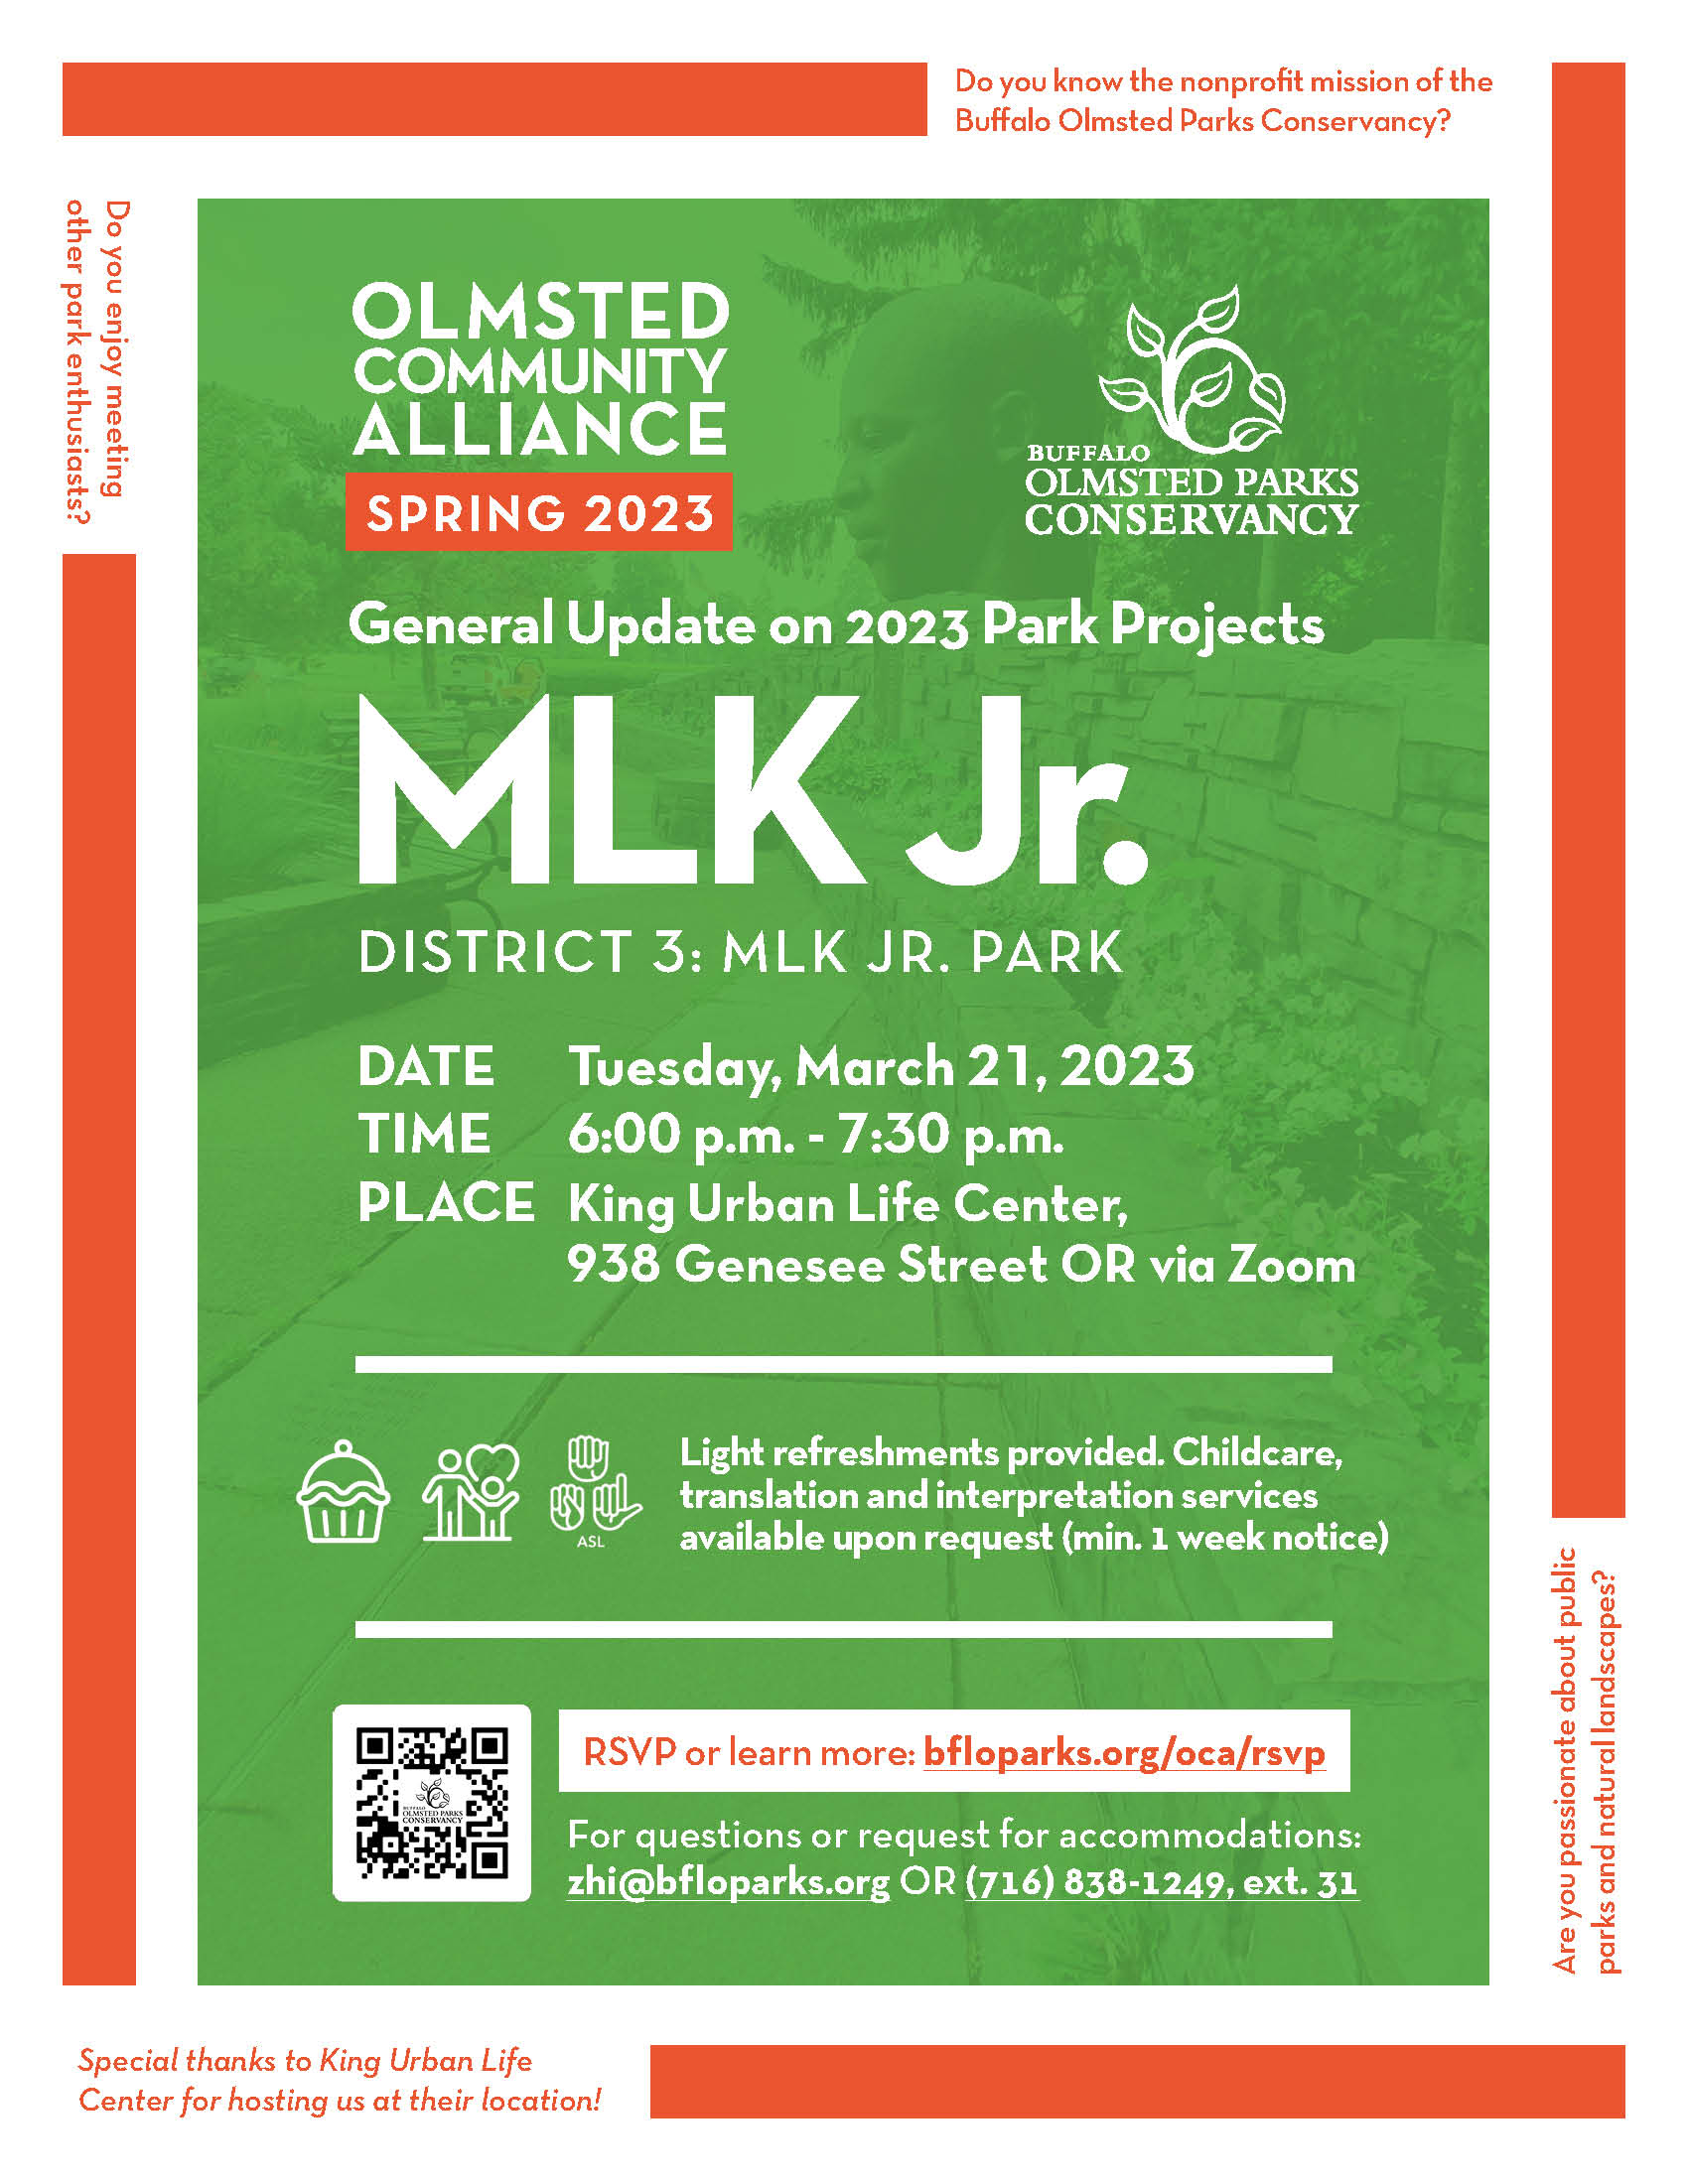 Flyer of the MLK Jr. District Meeting on March 21, 2023